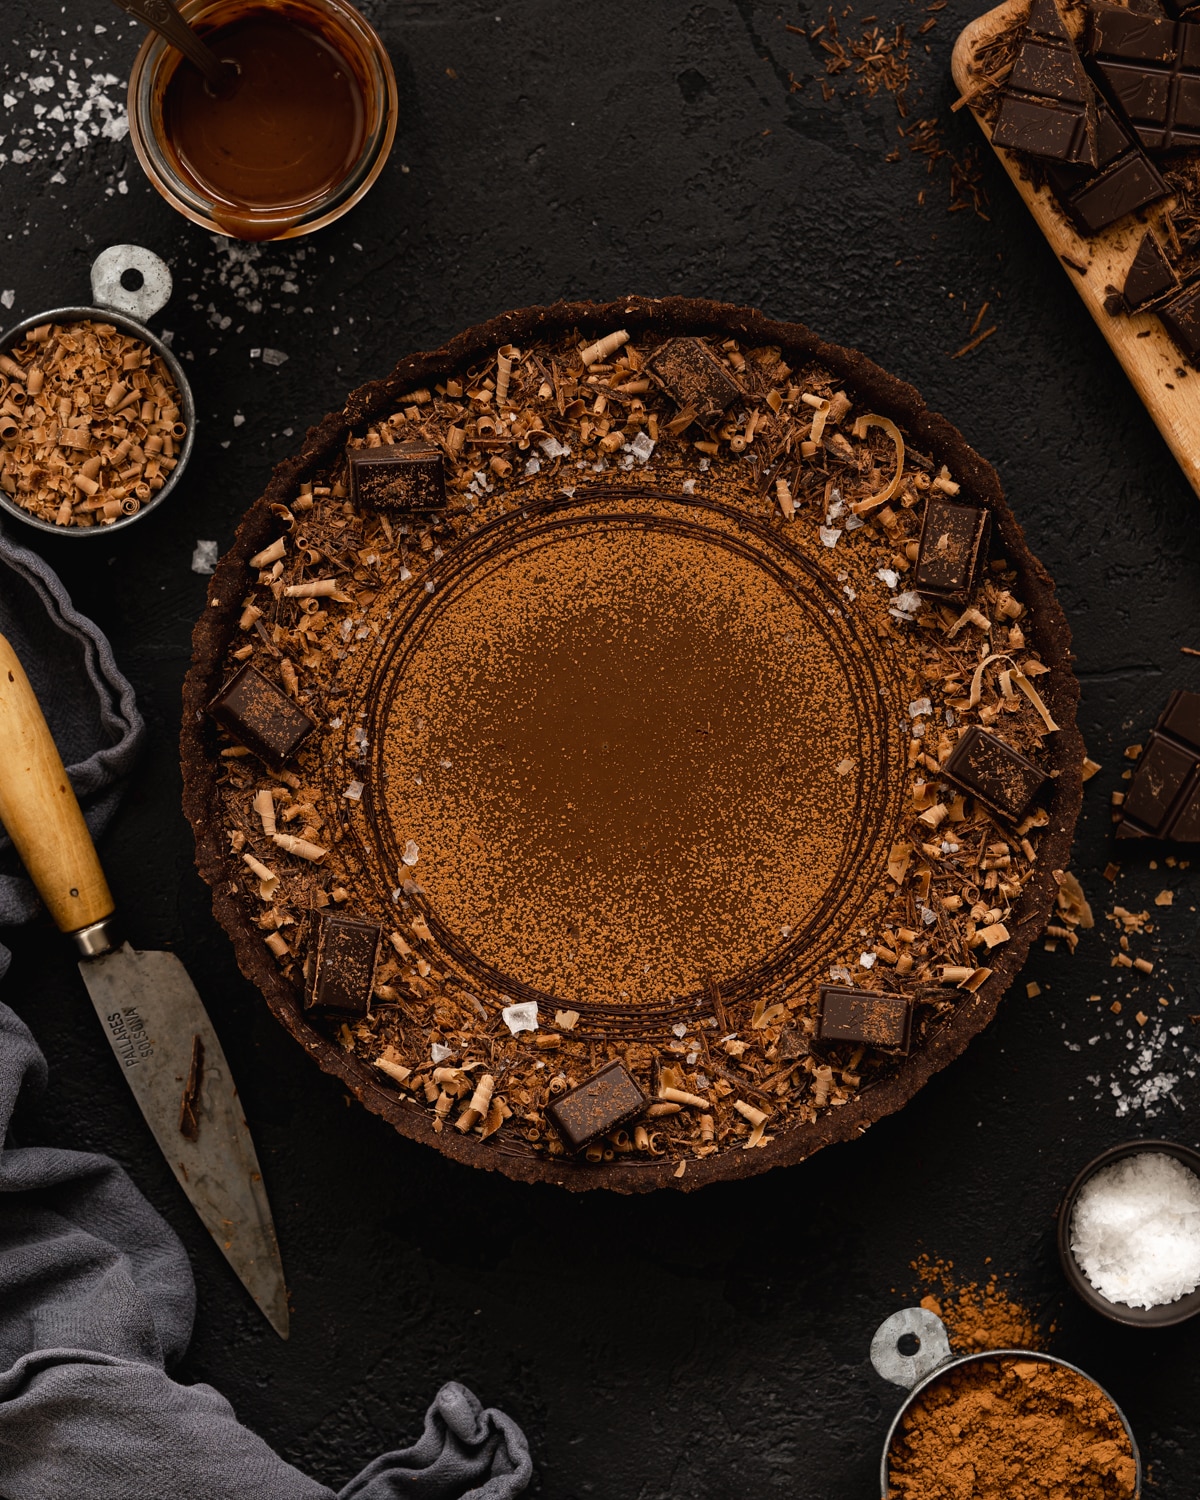 flat lay of chocolate tart with cacao powder and chocolate scattered around the scene on a dark background.